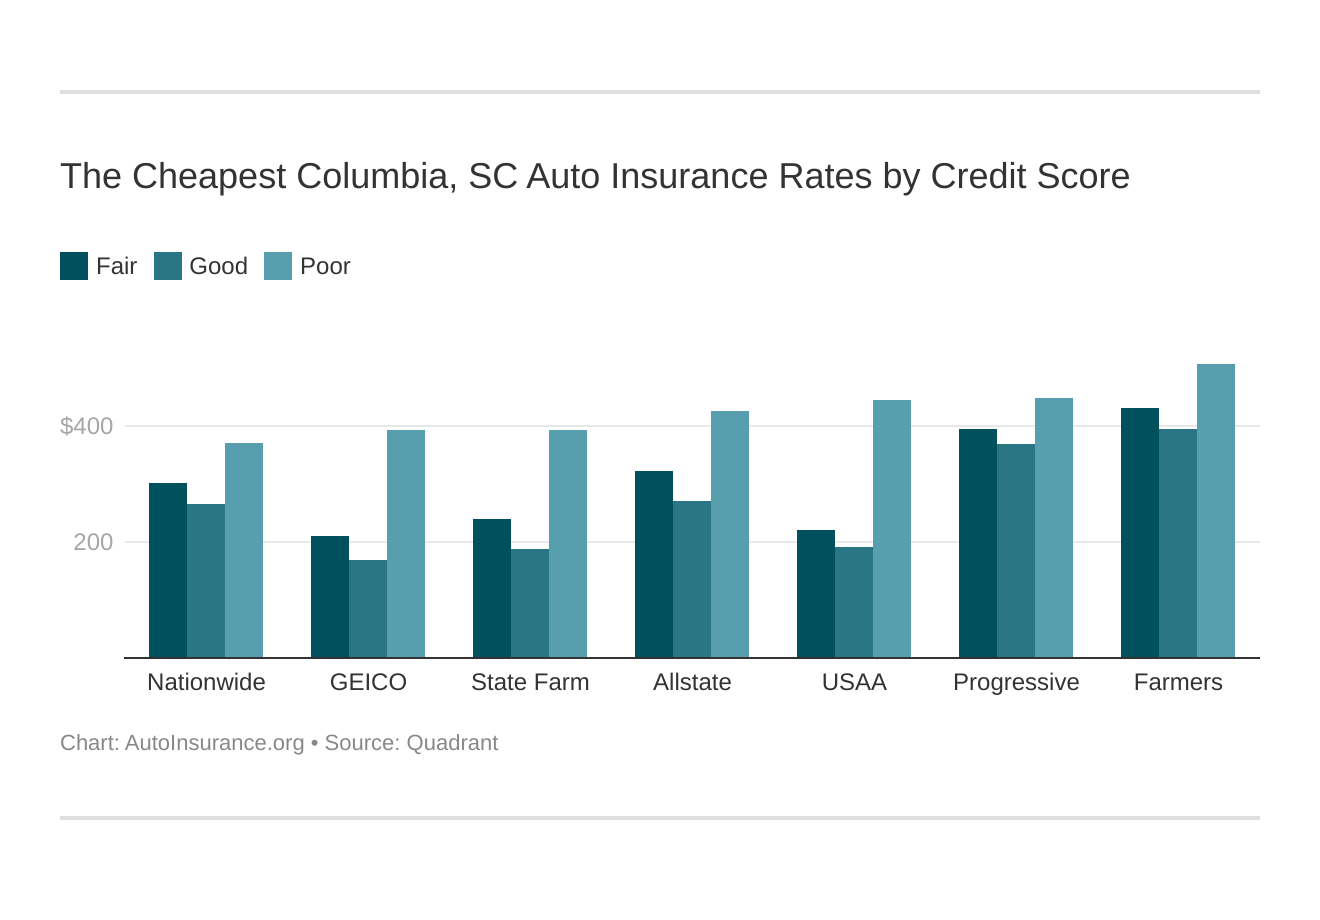 The Cheapest Columbia, SC Auto Insurance Rates by Credit Score